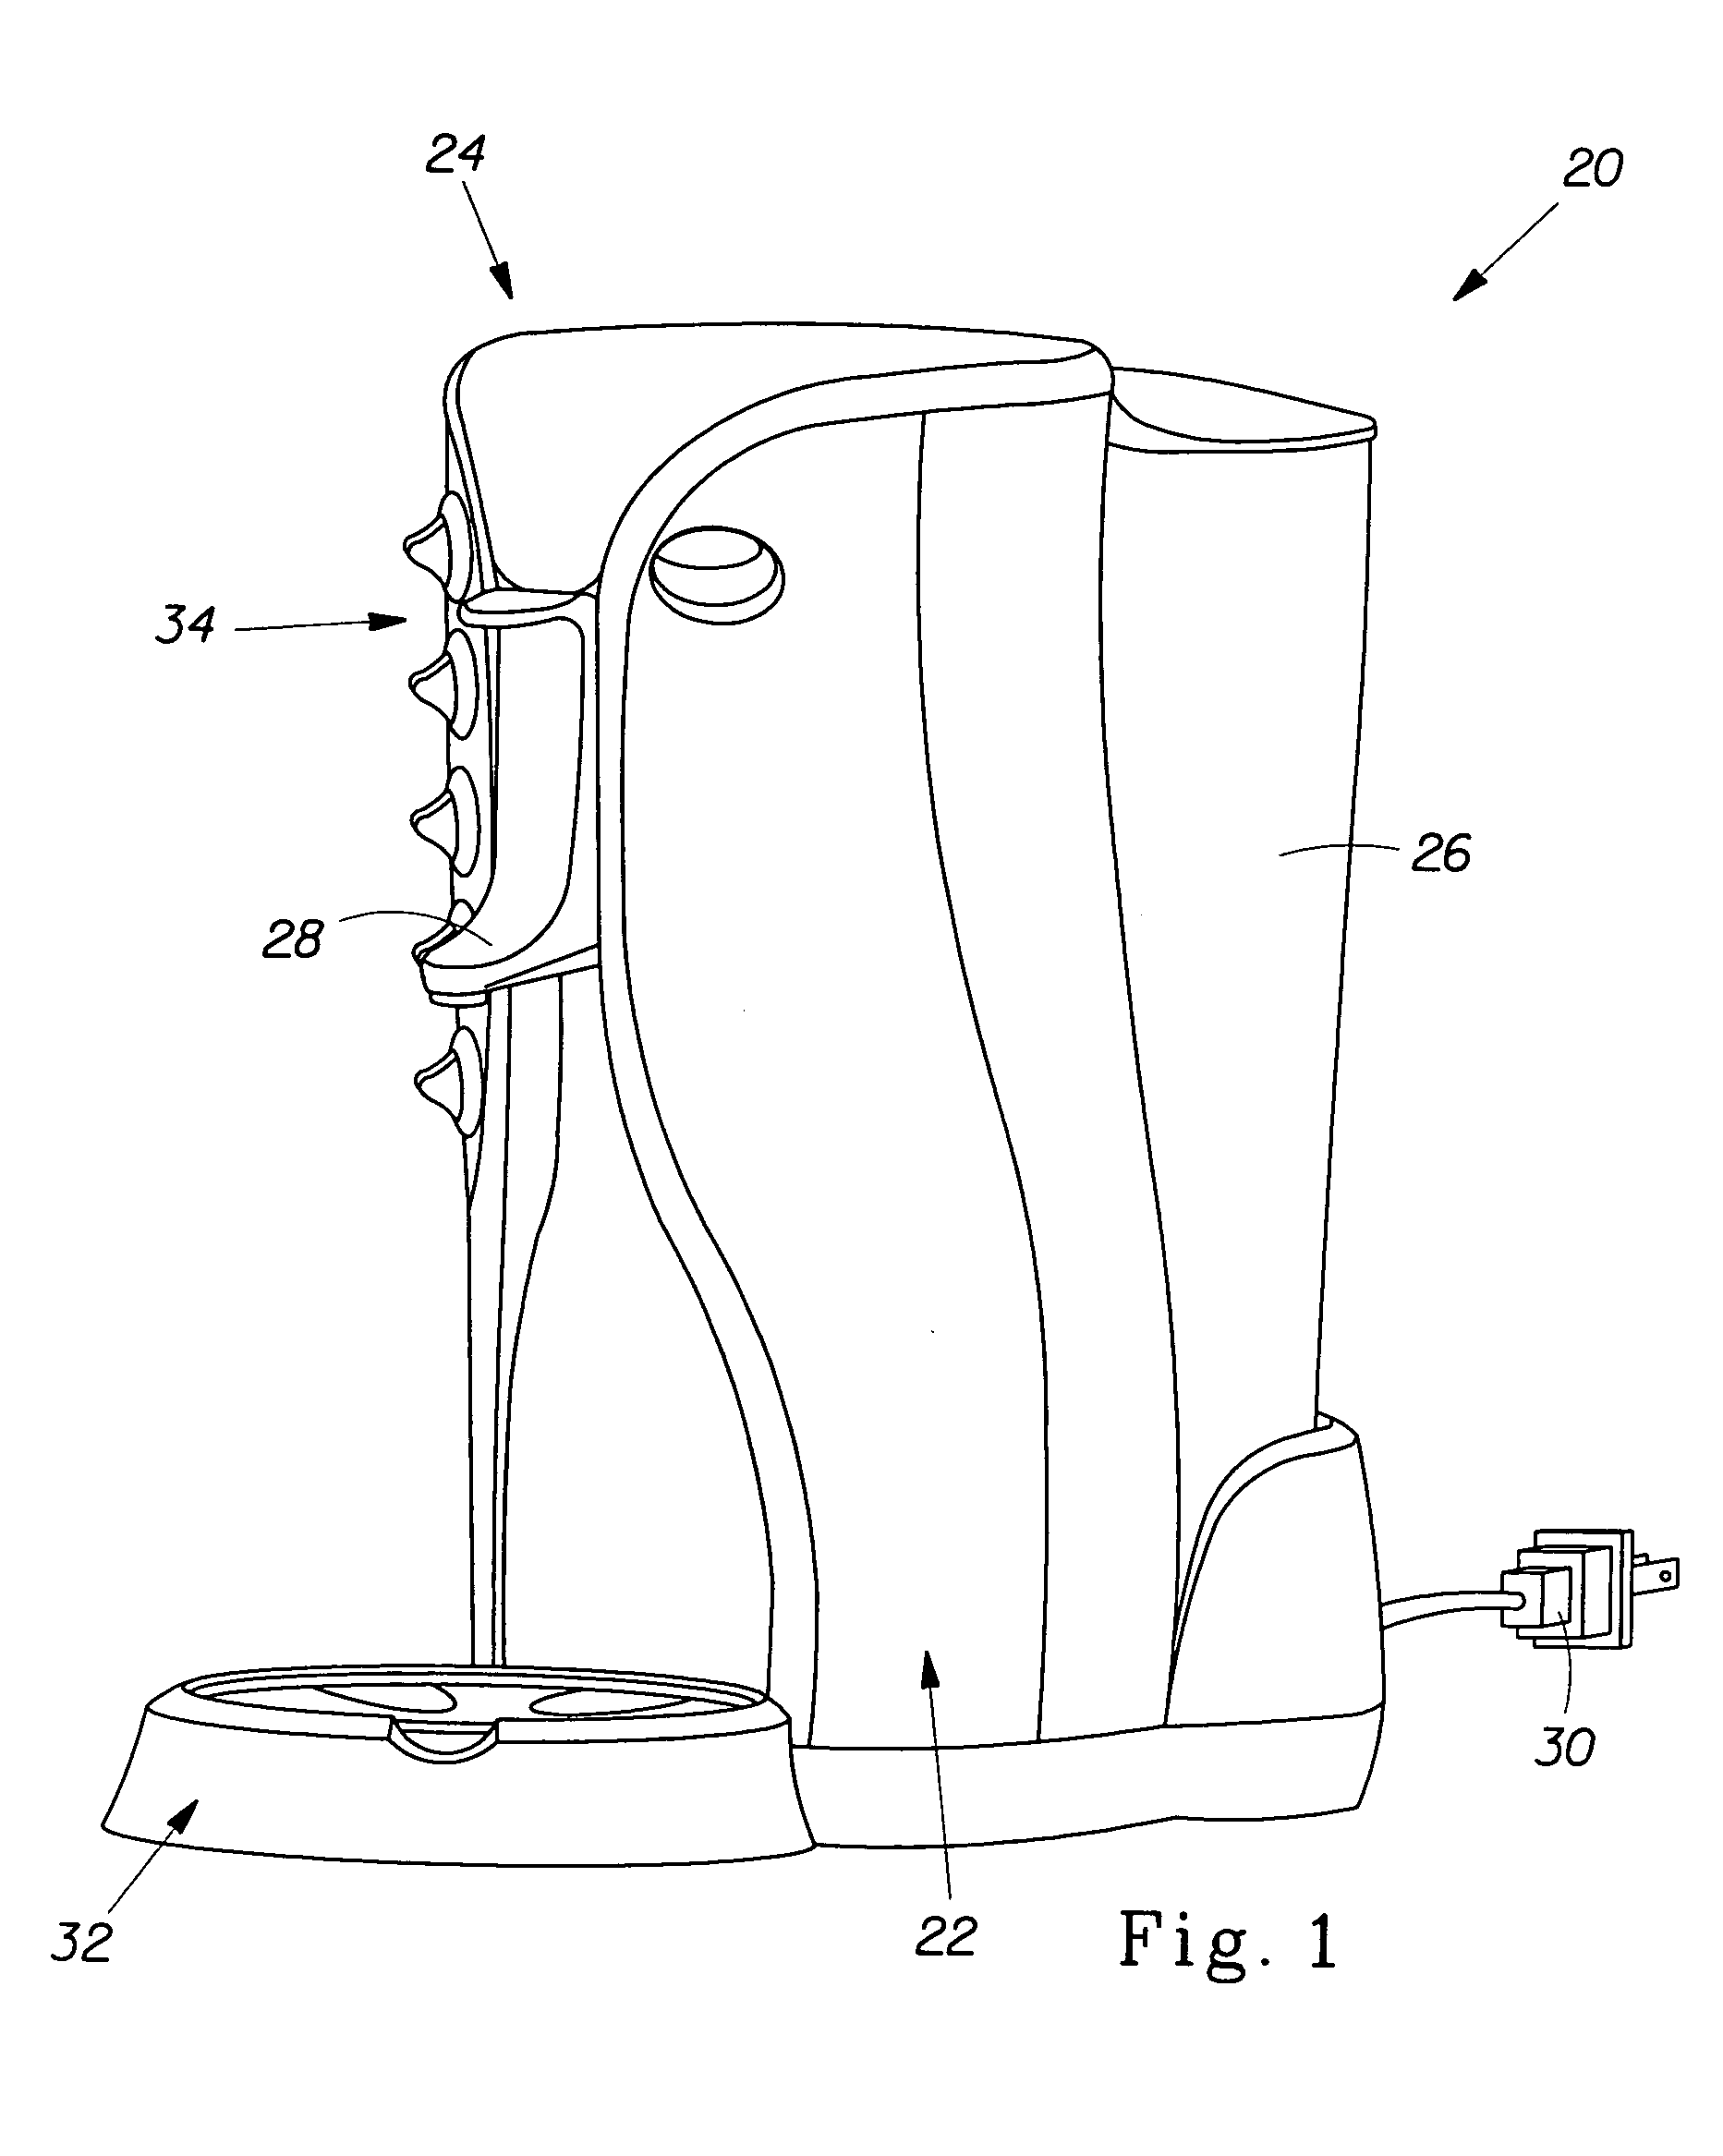 Beverage brewing devices